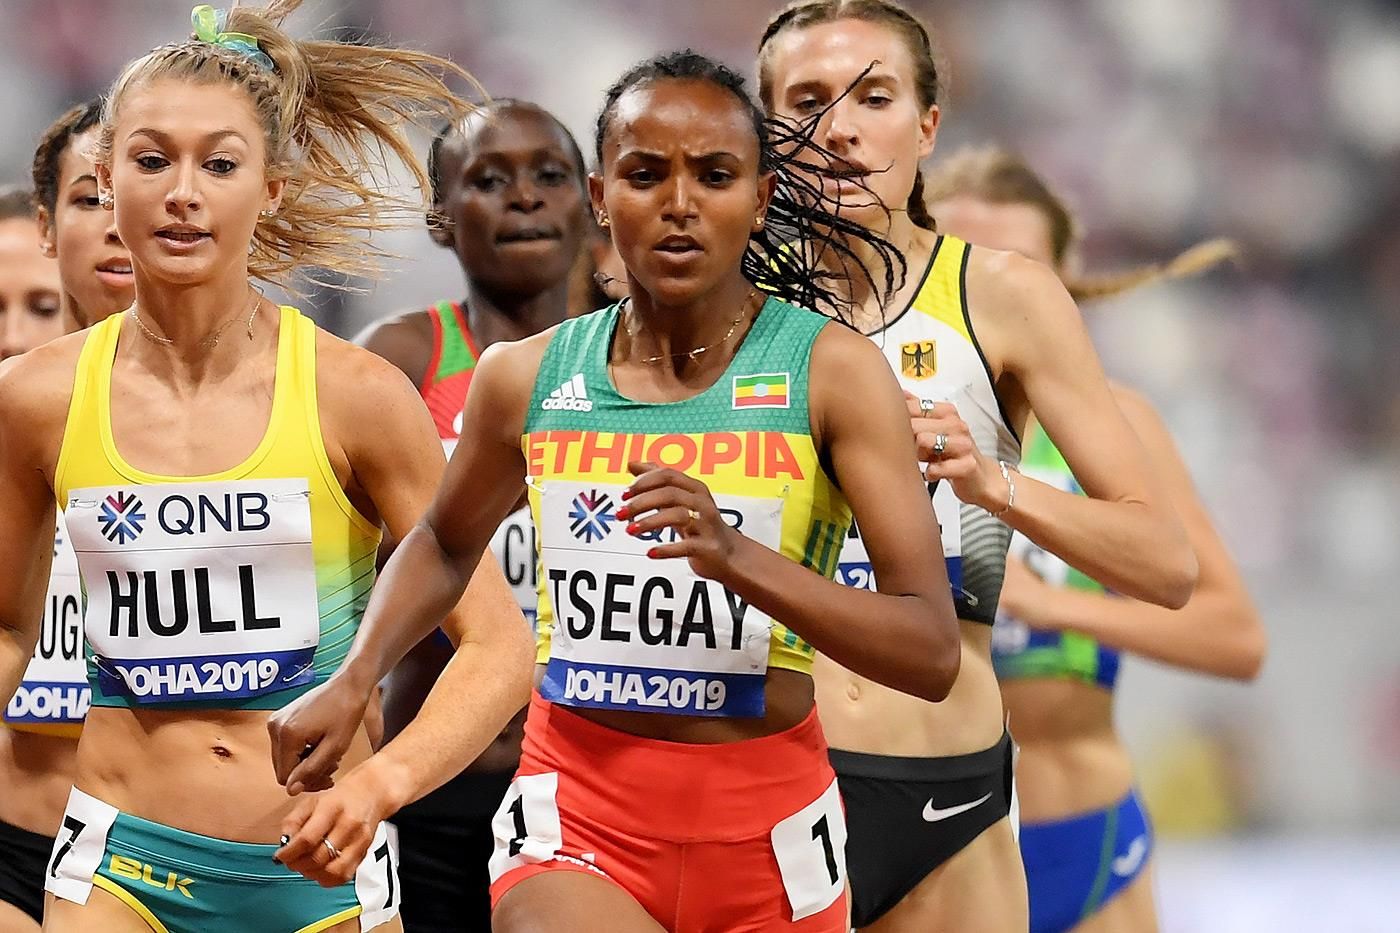 Tokyo Olympics preview: 5000m PREVIEWS | World Athletics